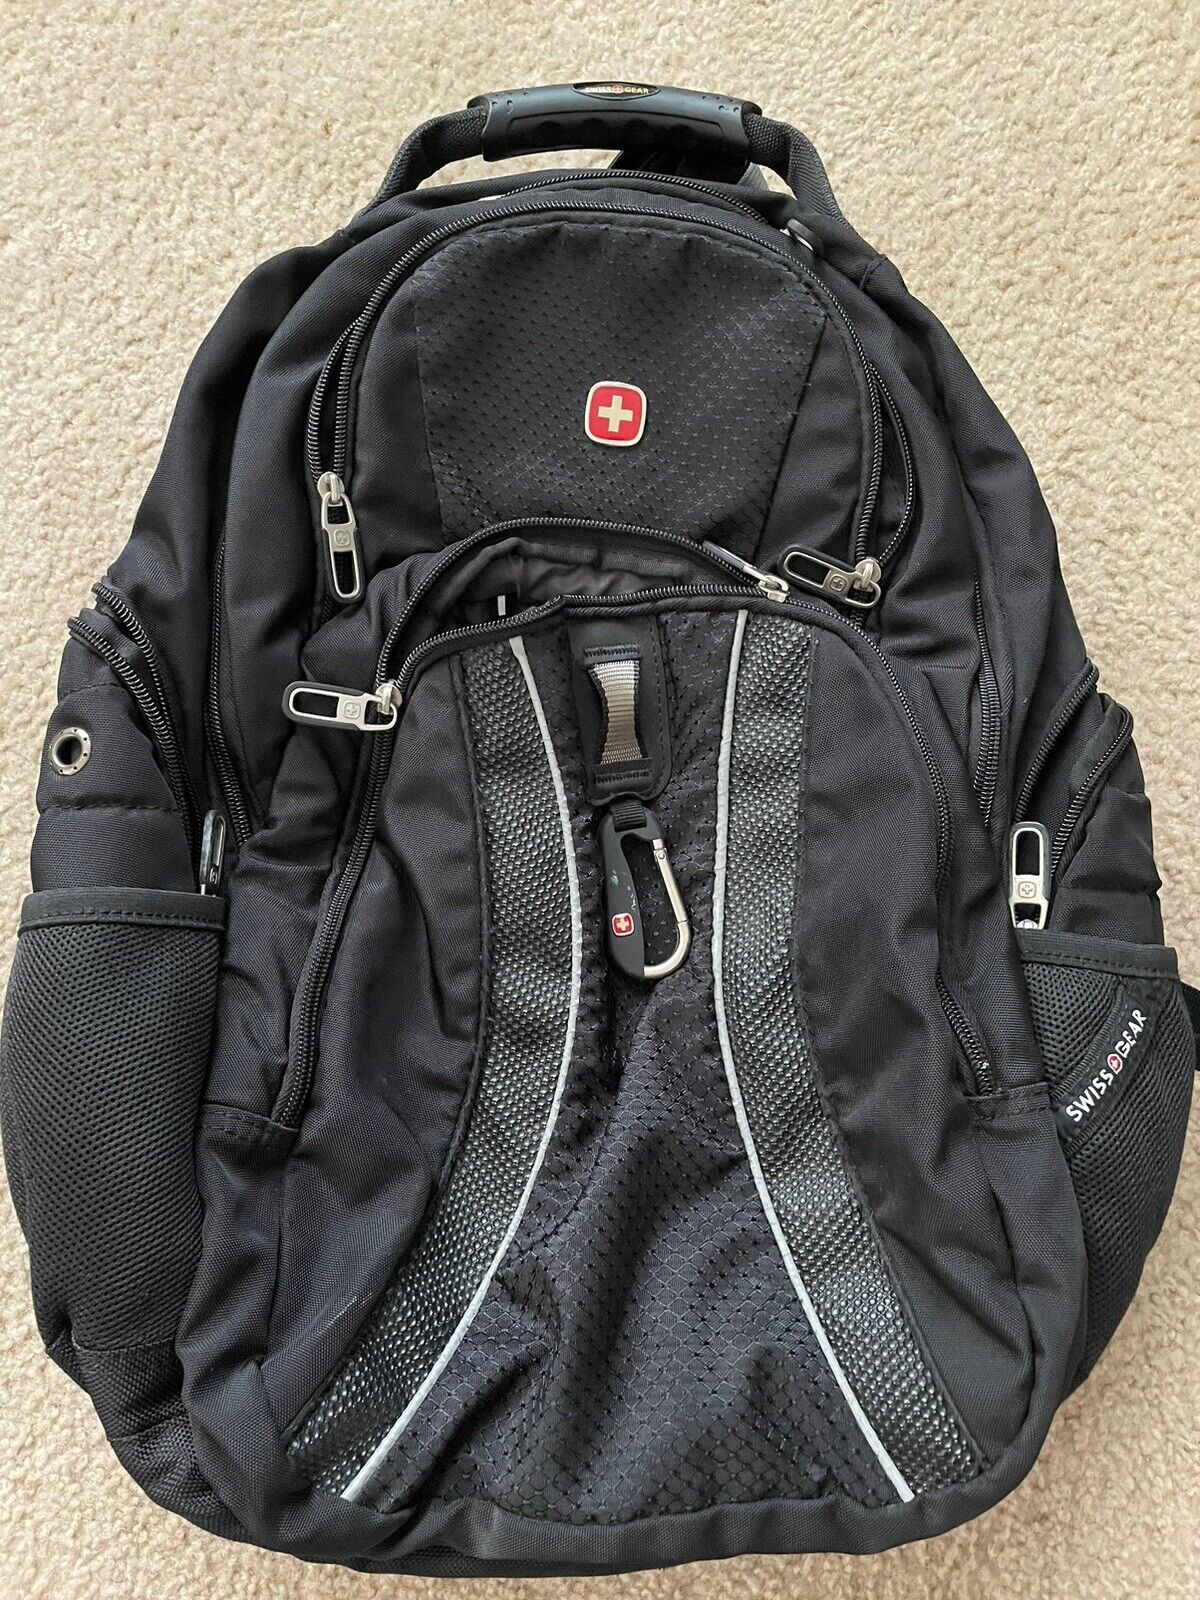 Swiss Gear Airflow Backpack Scan Smart Bag Nice Condition